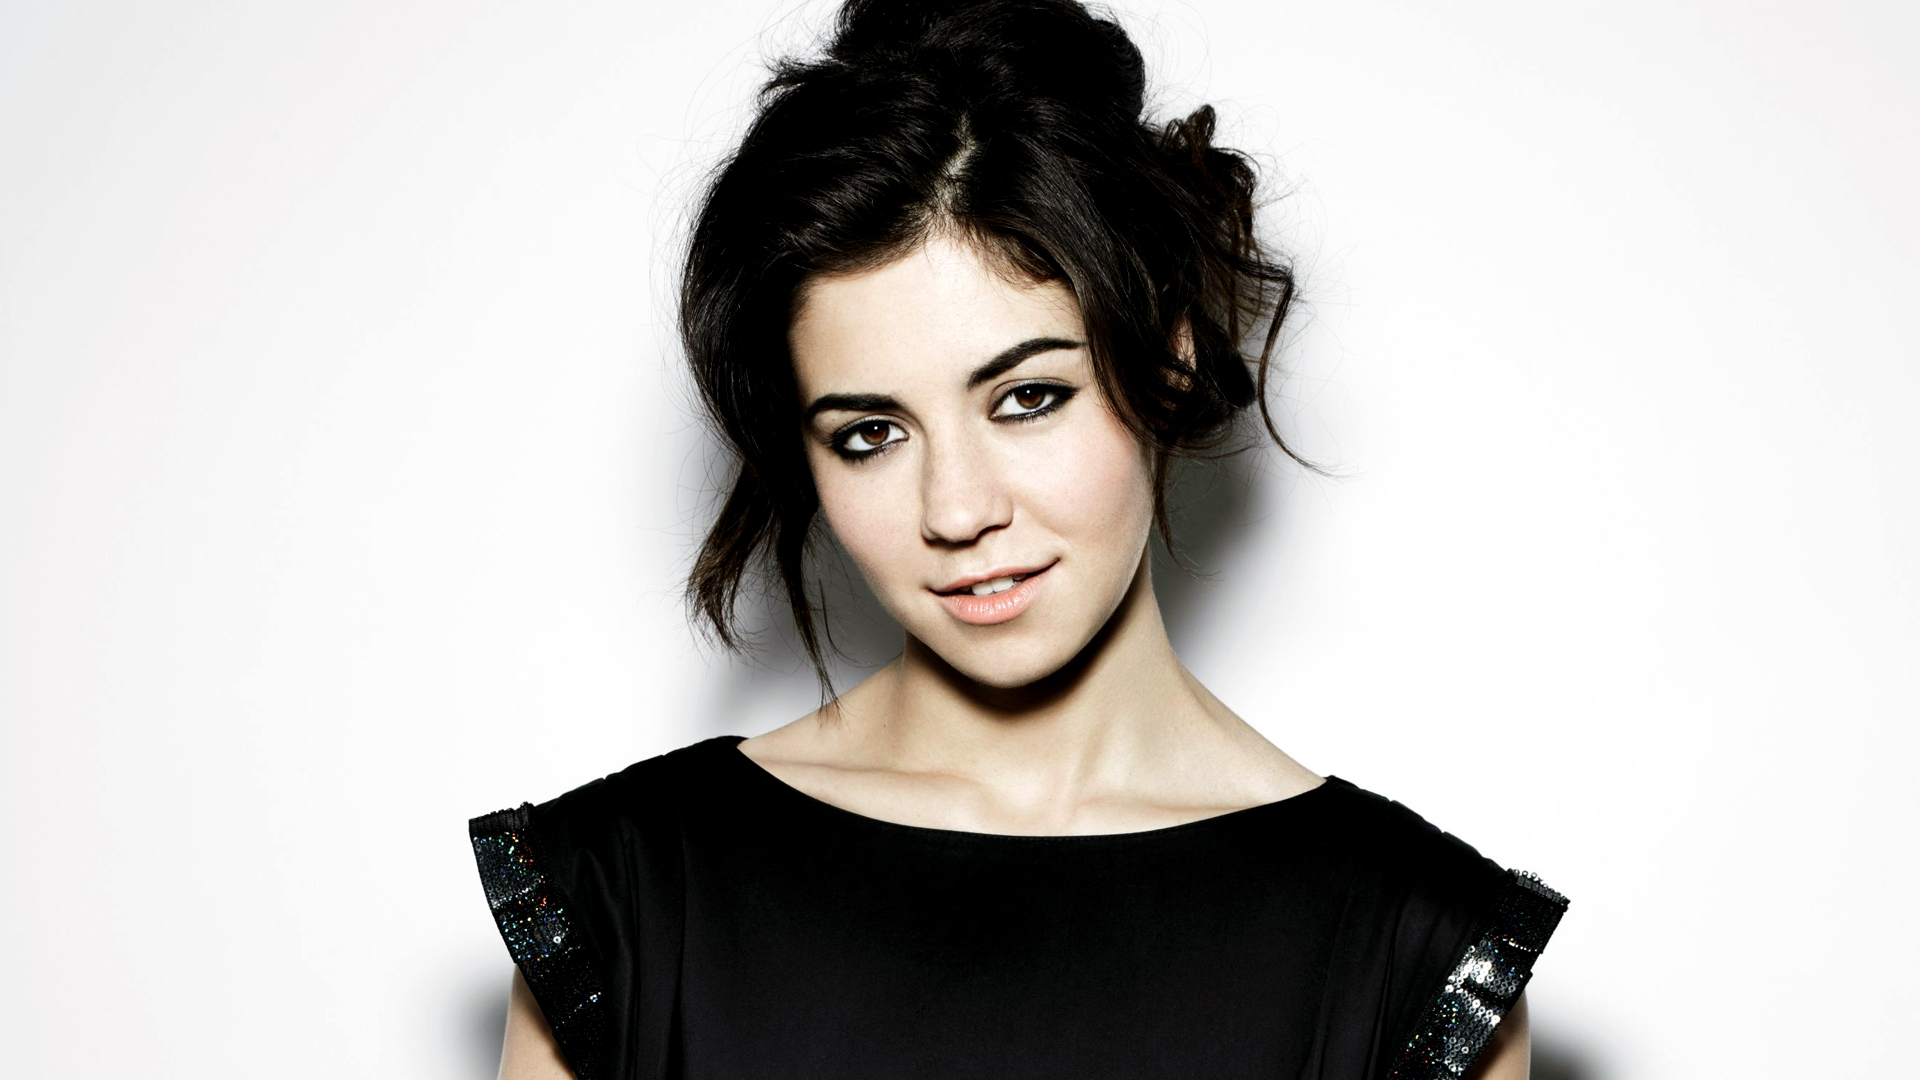 Marina And The Diamonds Backgrounds, Compatible - PC, Mobile, Gadgets| 1920x1080 px